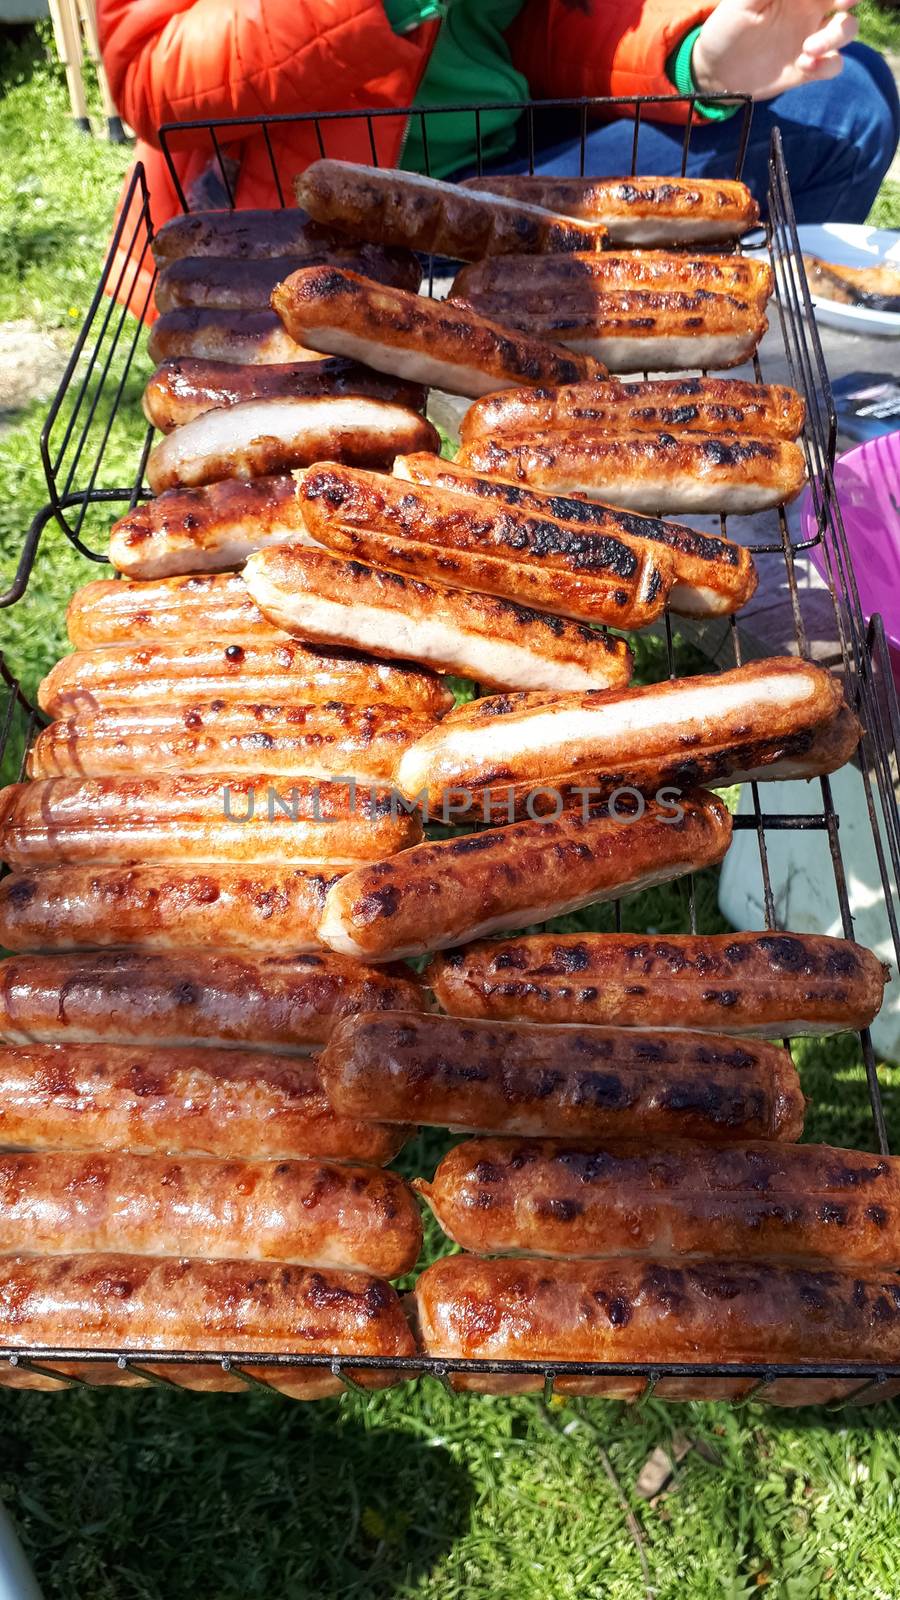 Grilled sausages on a grid. Barbecue in the backyard.